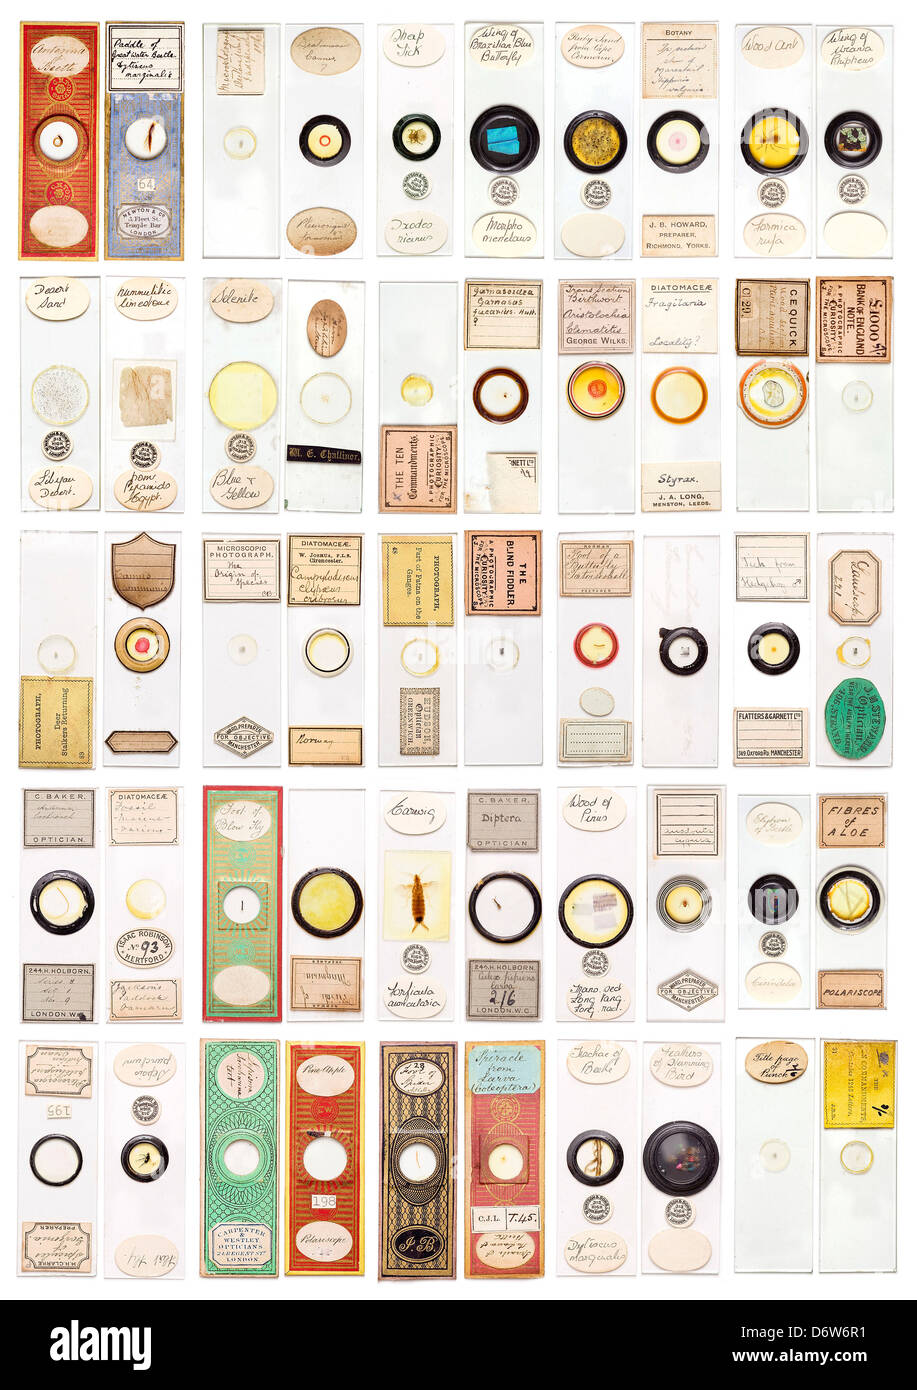 Vintage microscope specimen slide collection showing diversity of labels and mounts Stock Photo